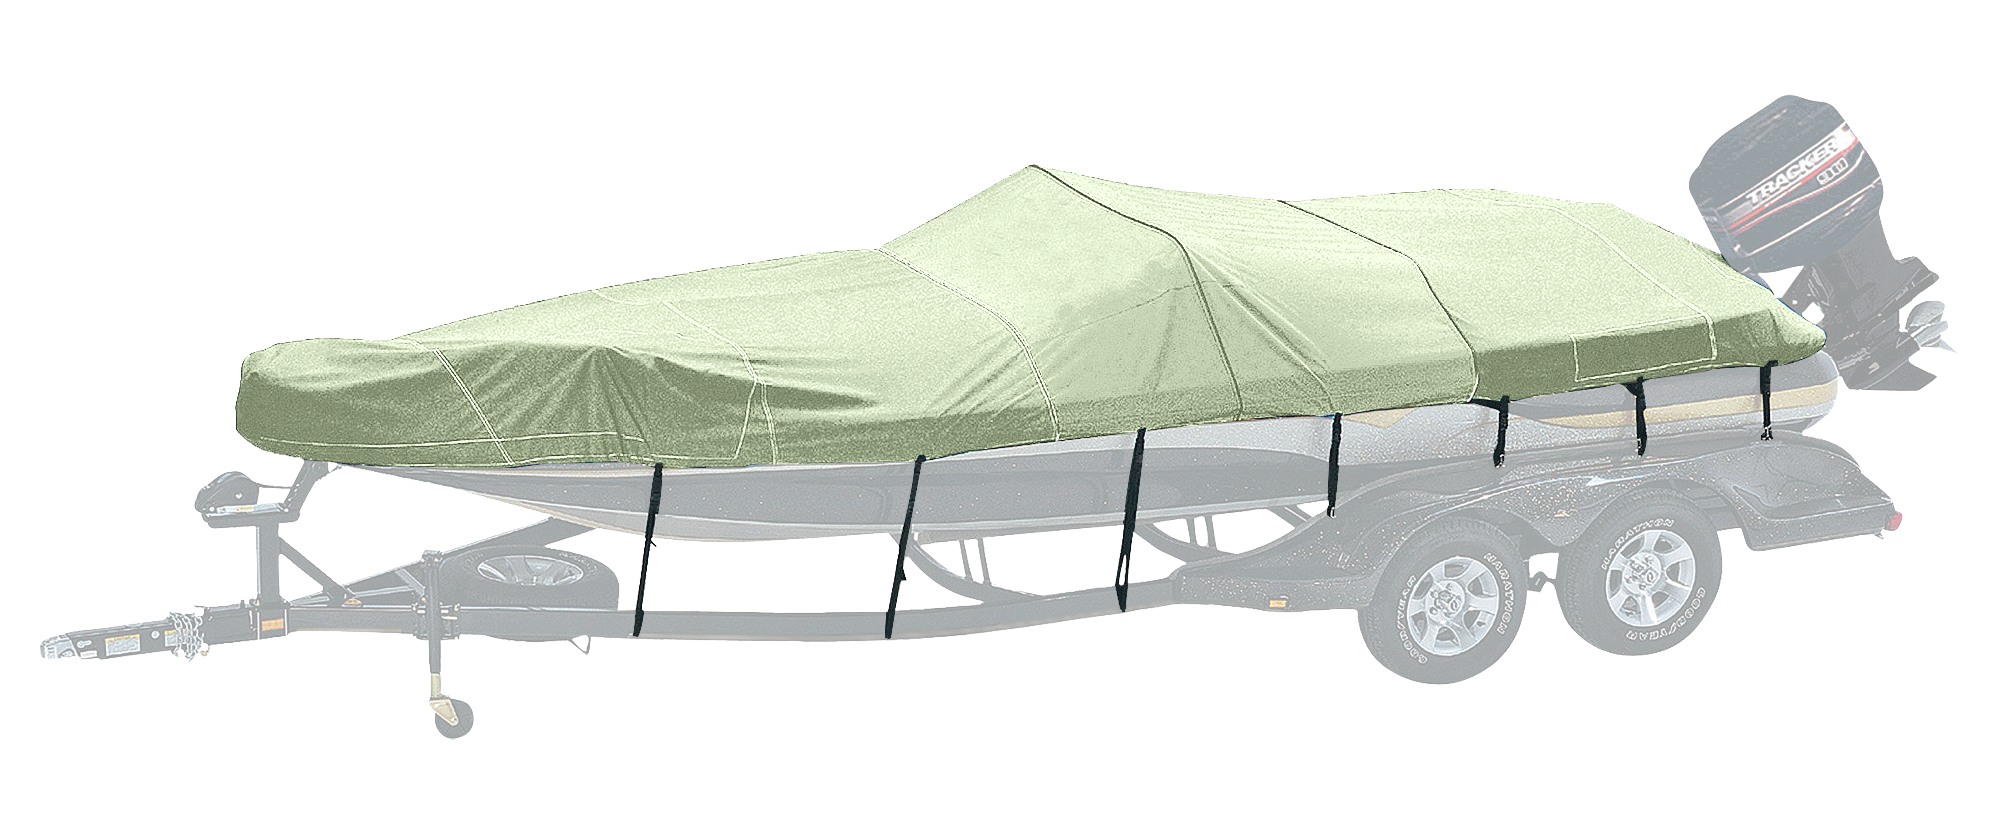 Bass Pro Shops Exact Fit Boat Cover by Westland - Tahoe - 2005 228 Deckboat I/O with Tower - Linen